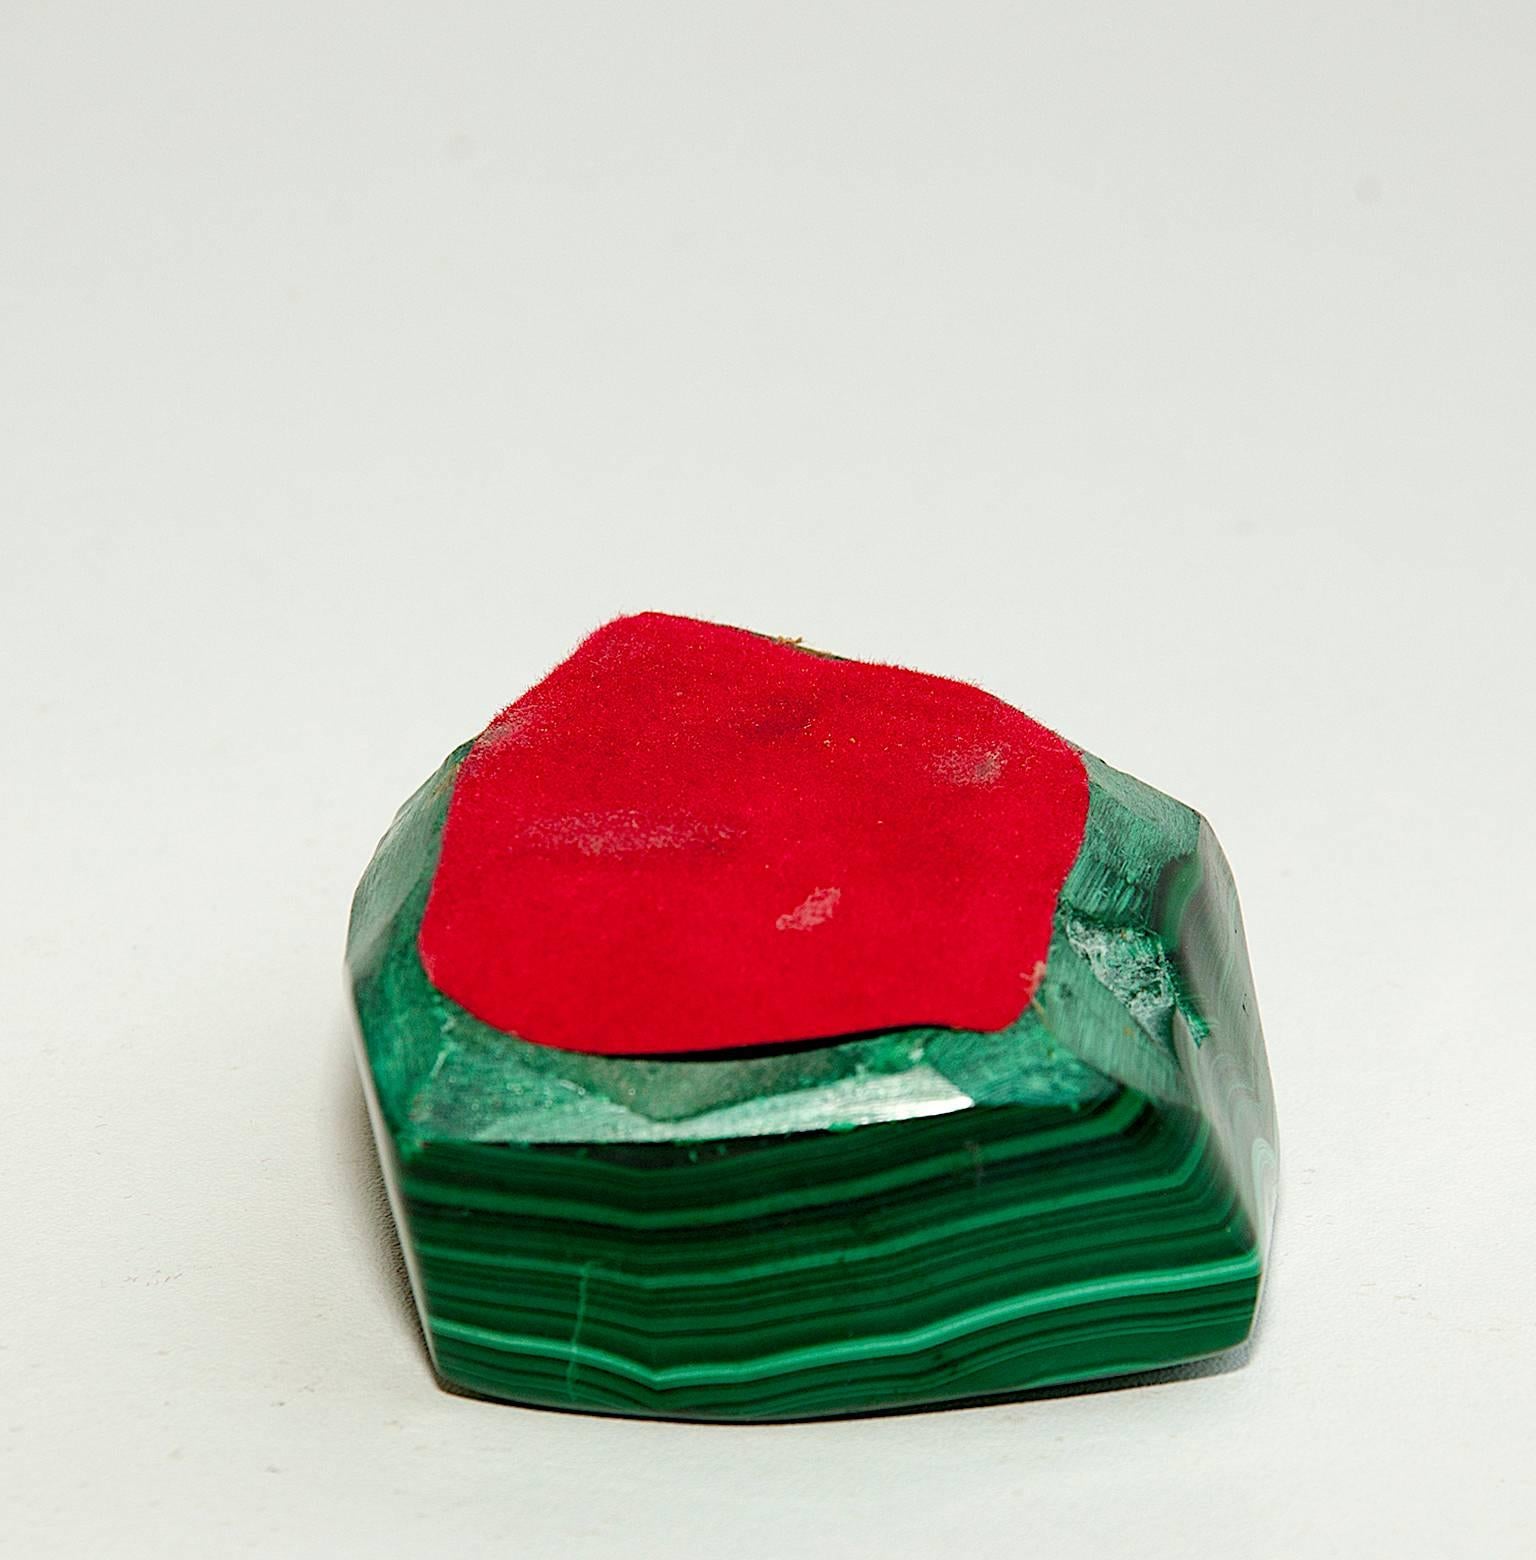 Congolese Ashtray with an Egg in Malachite